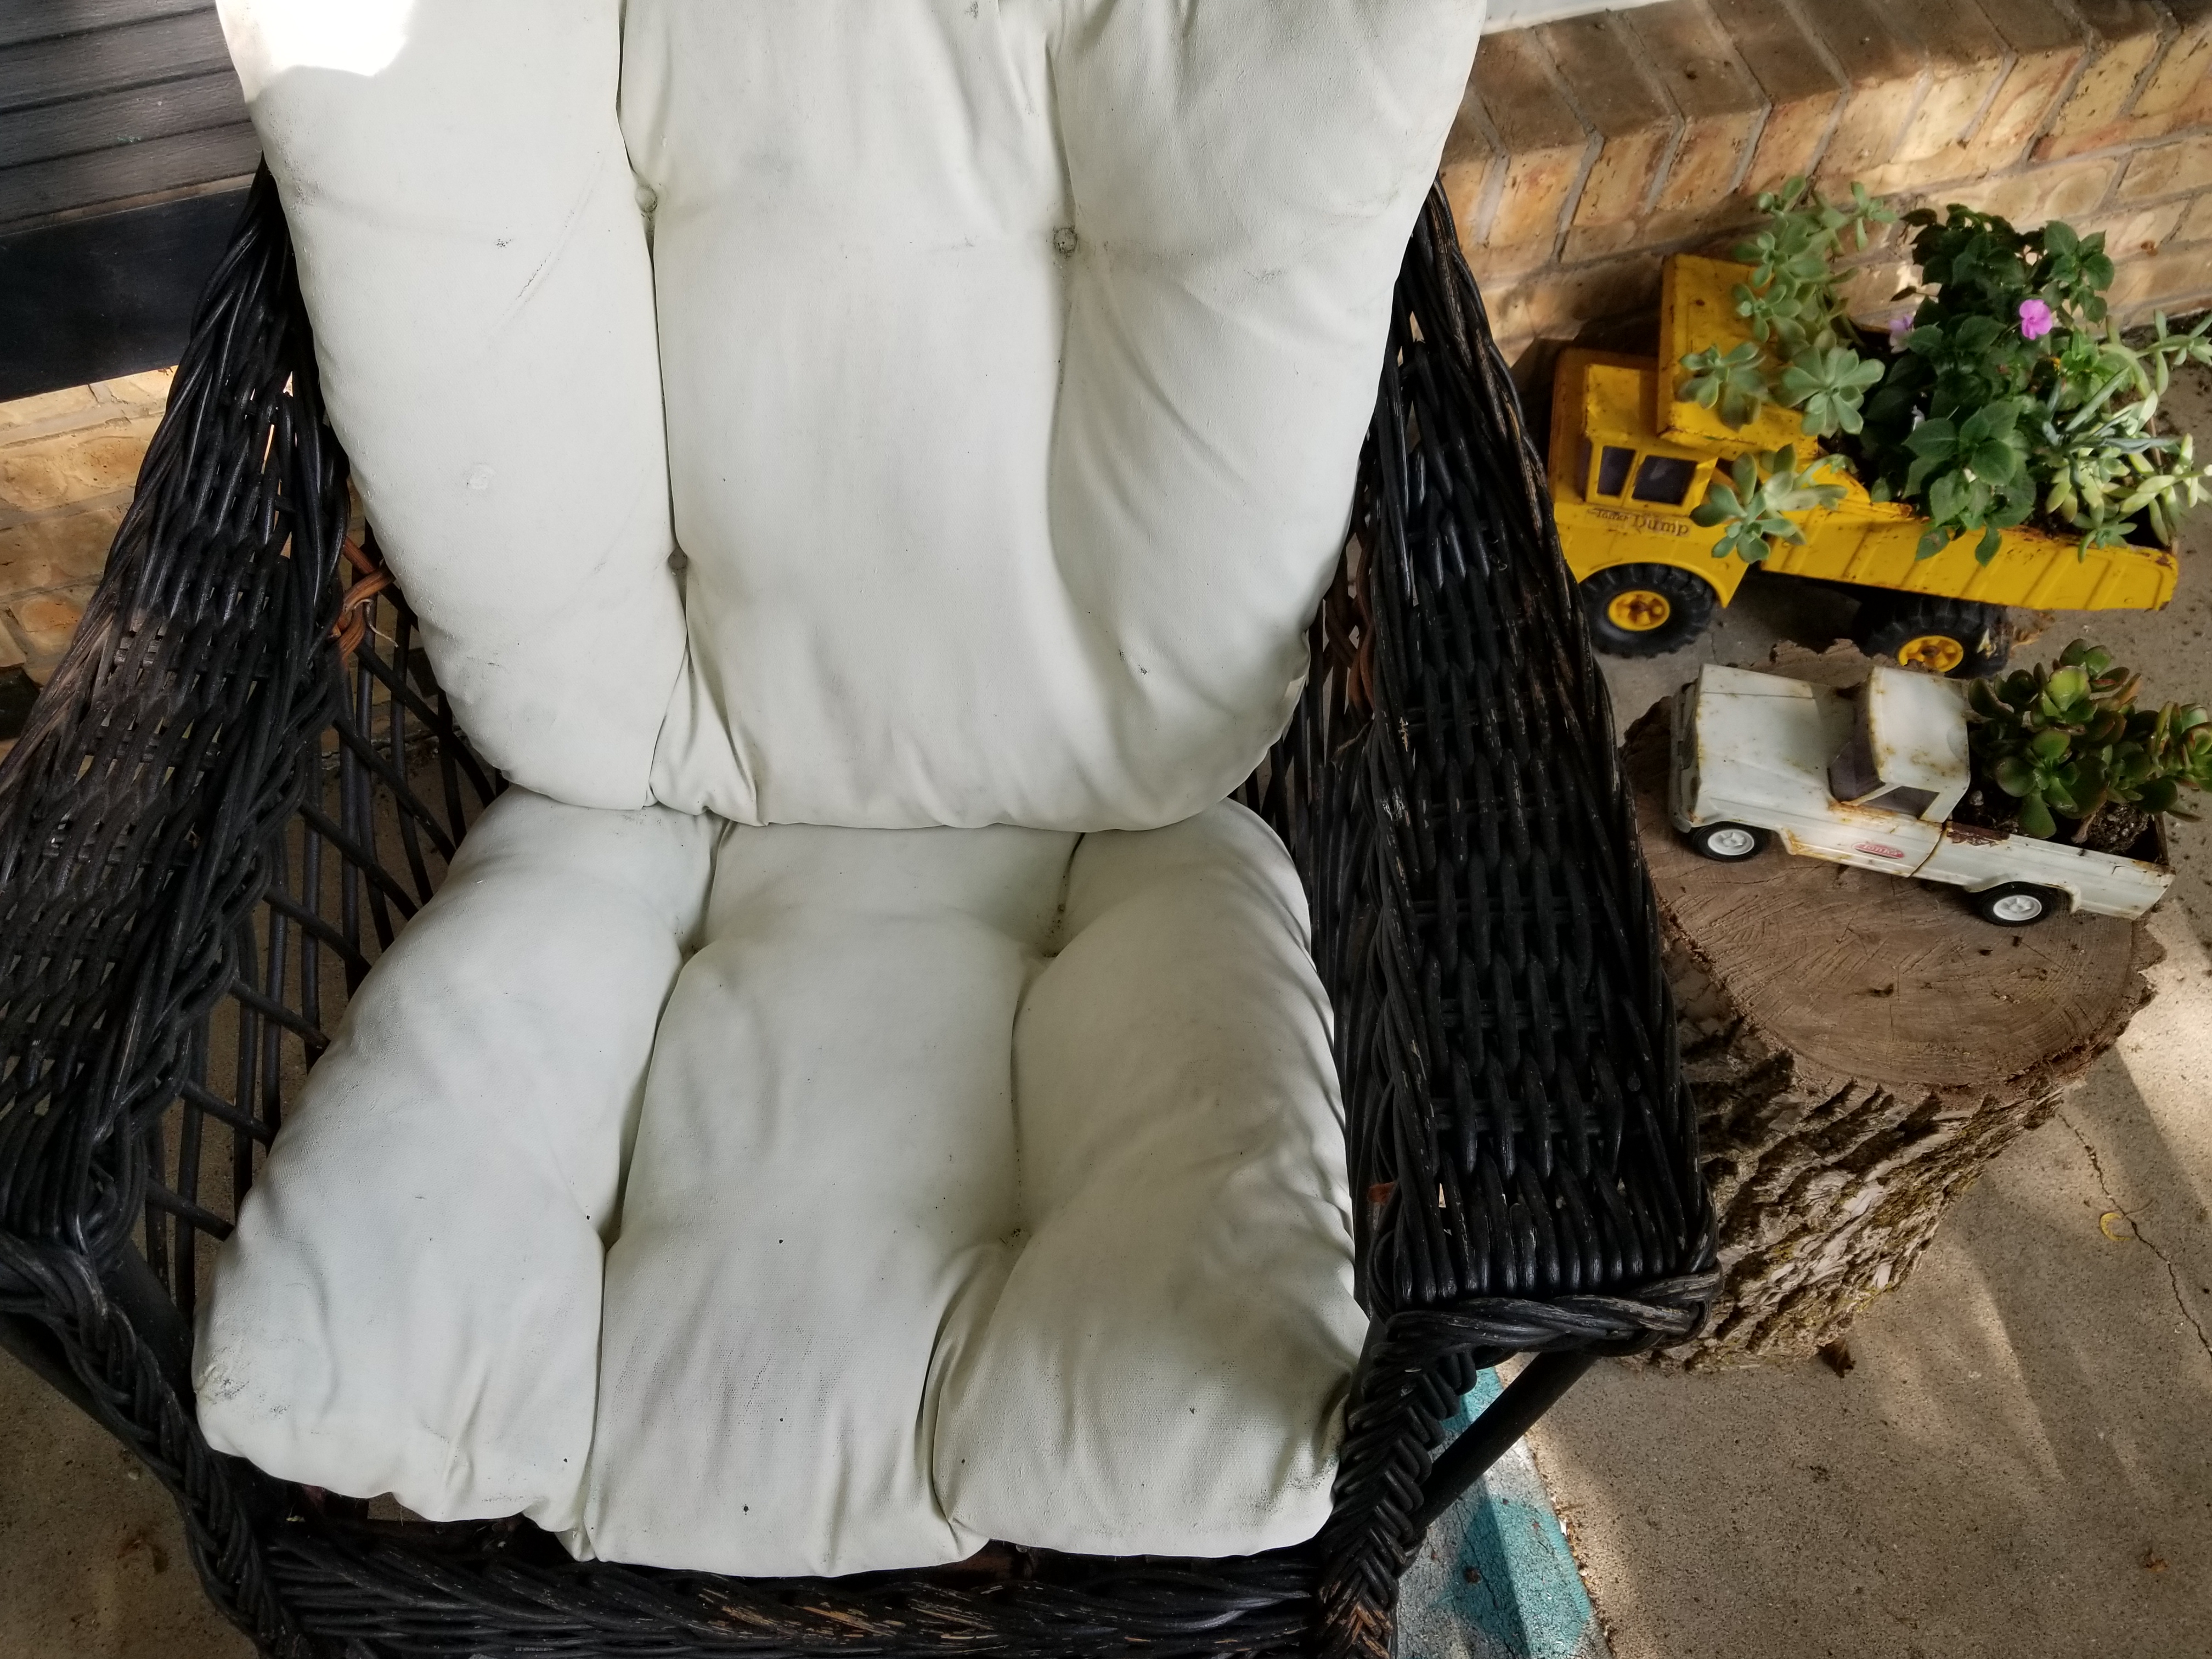 Wicker Rocker Makeover After Painted Cushions